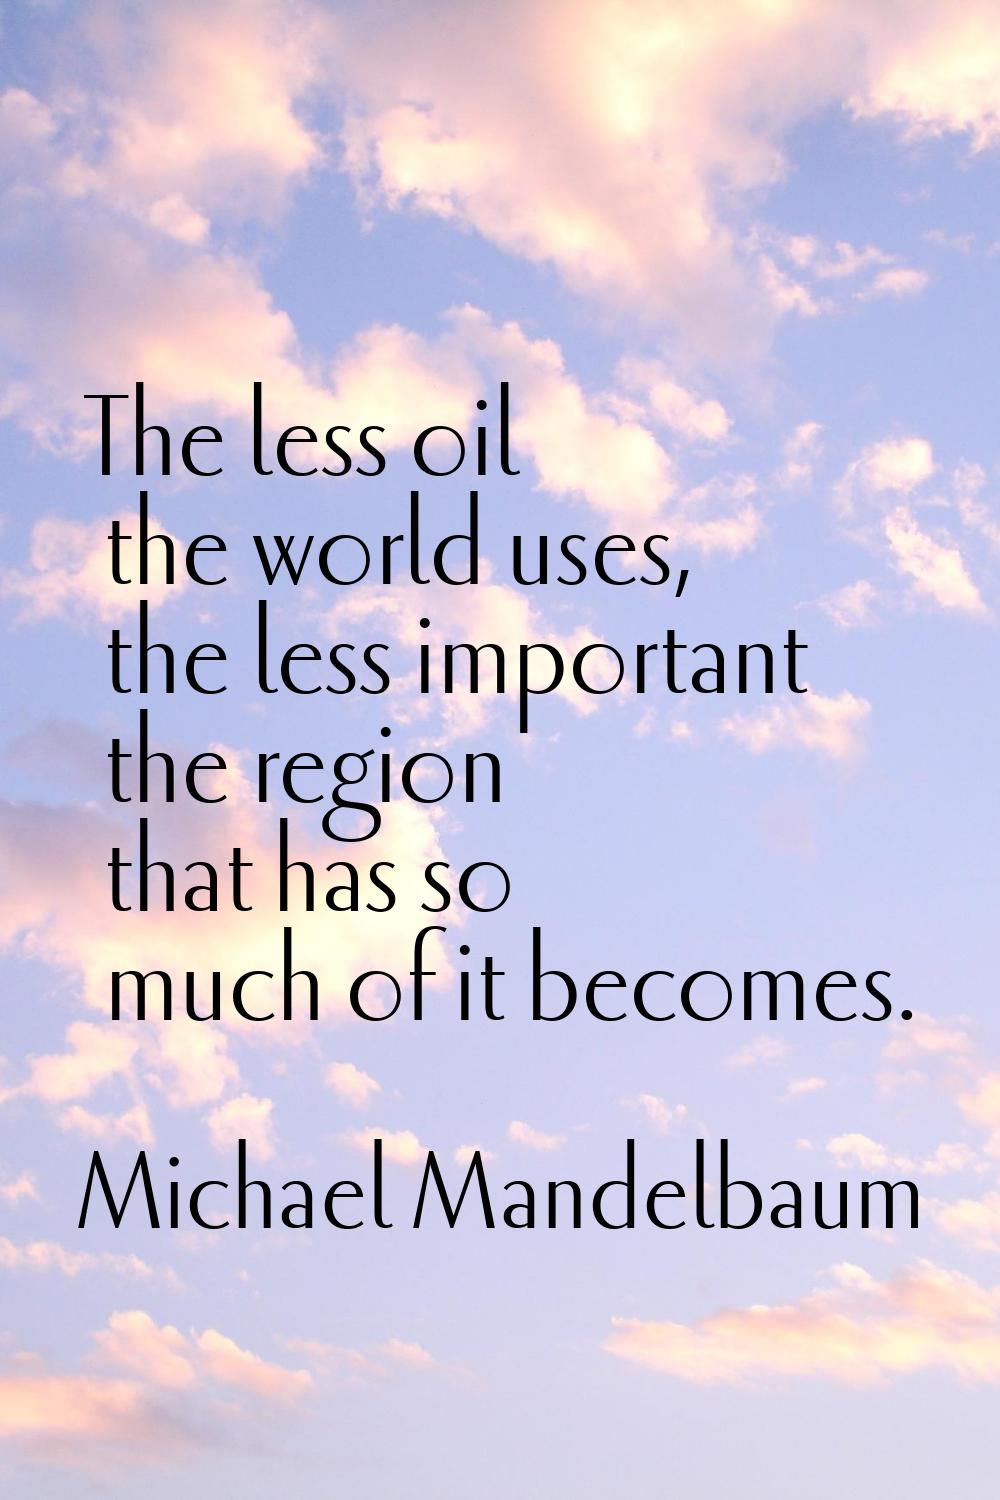 The less oil the world uses, the less important the region that has so much of it becomes.